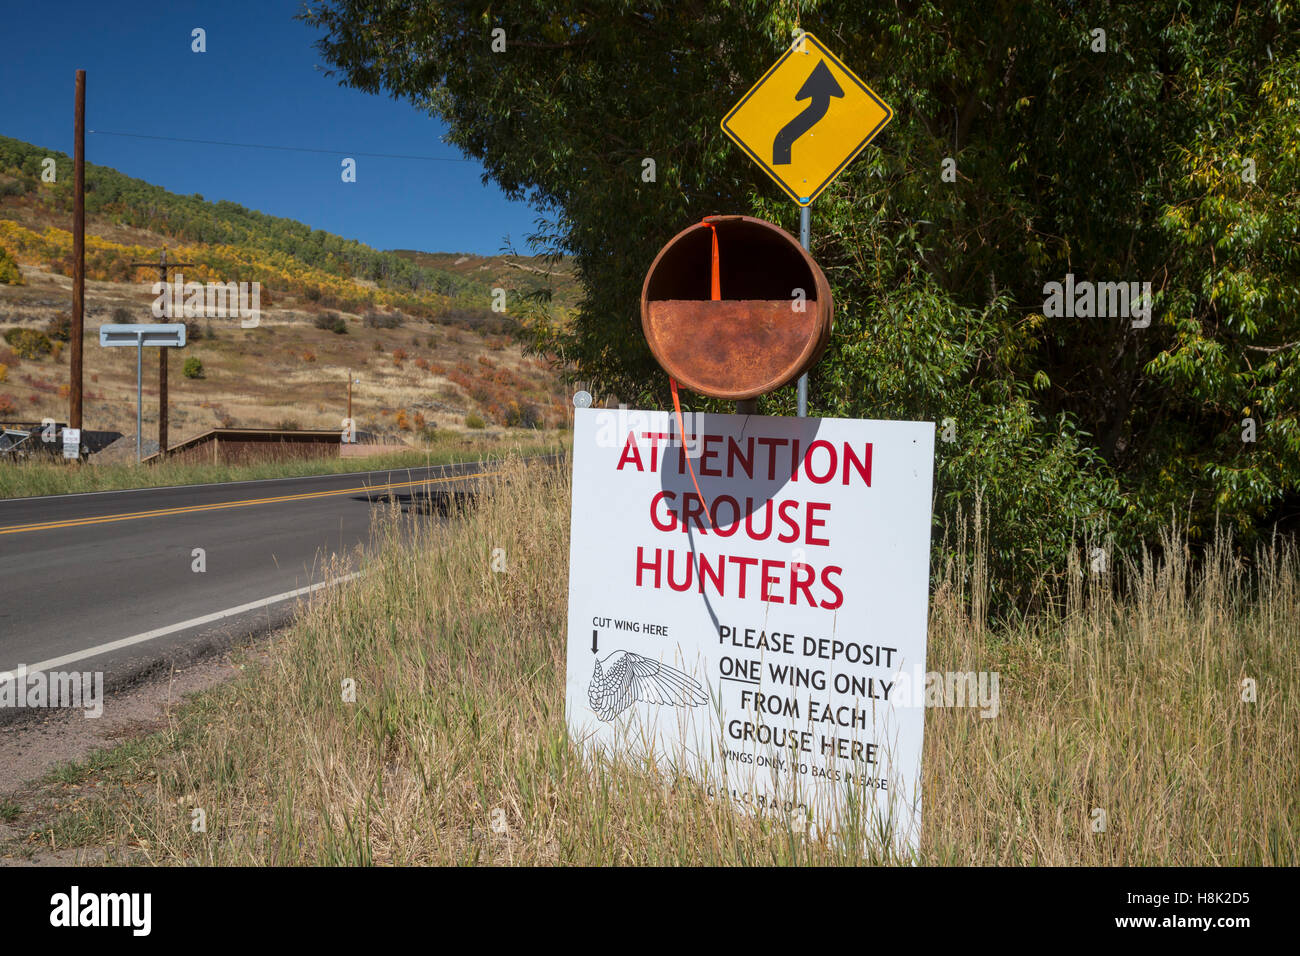 Oak Creek, Colorado - A container where grouse hunters are asked to deposit one wing from each grouse for a scientific study. Stock Photo